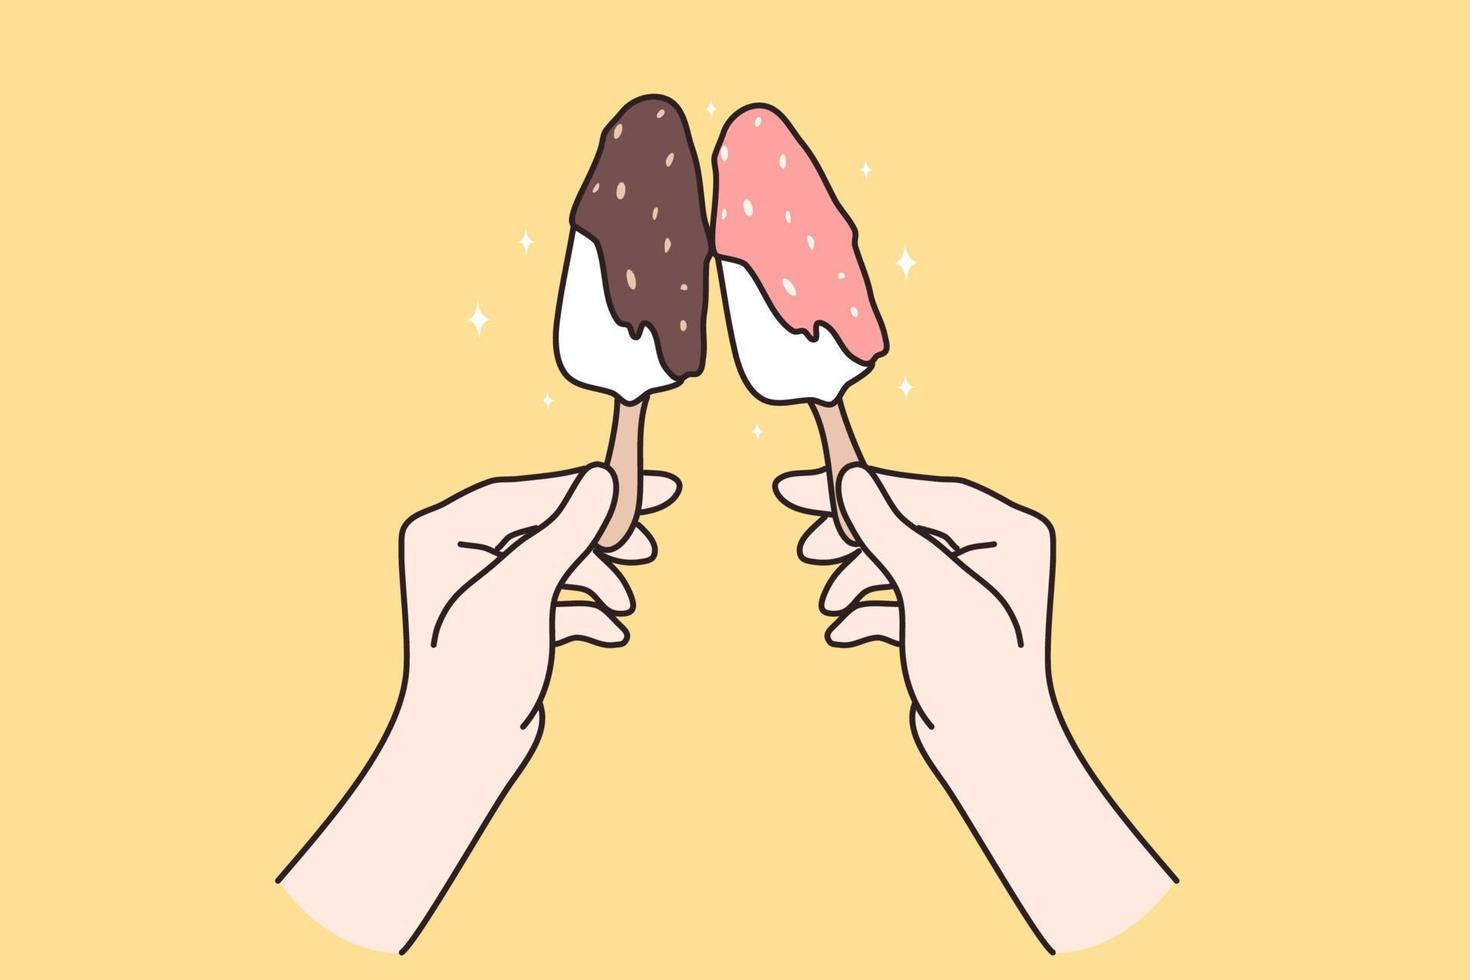 Desserts and sweet food concept. Human hands holding together ice creams with nuts and chocolate glaze over yellow background vector illustration